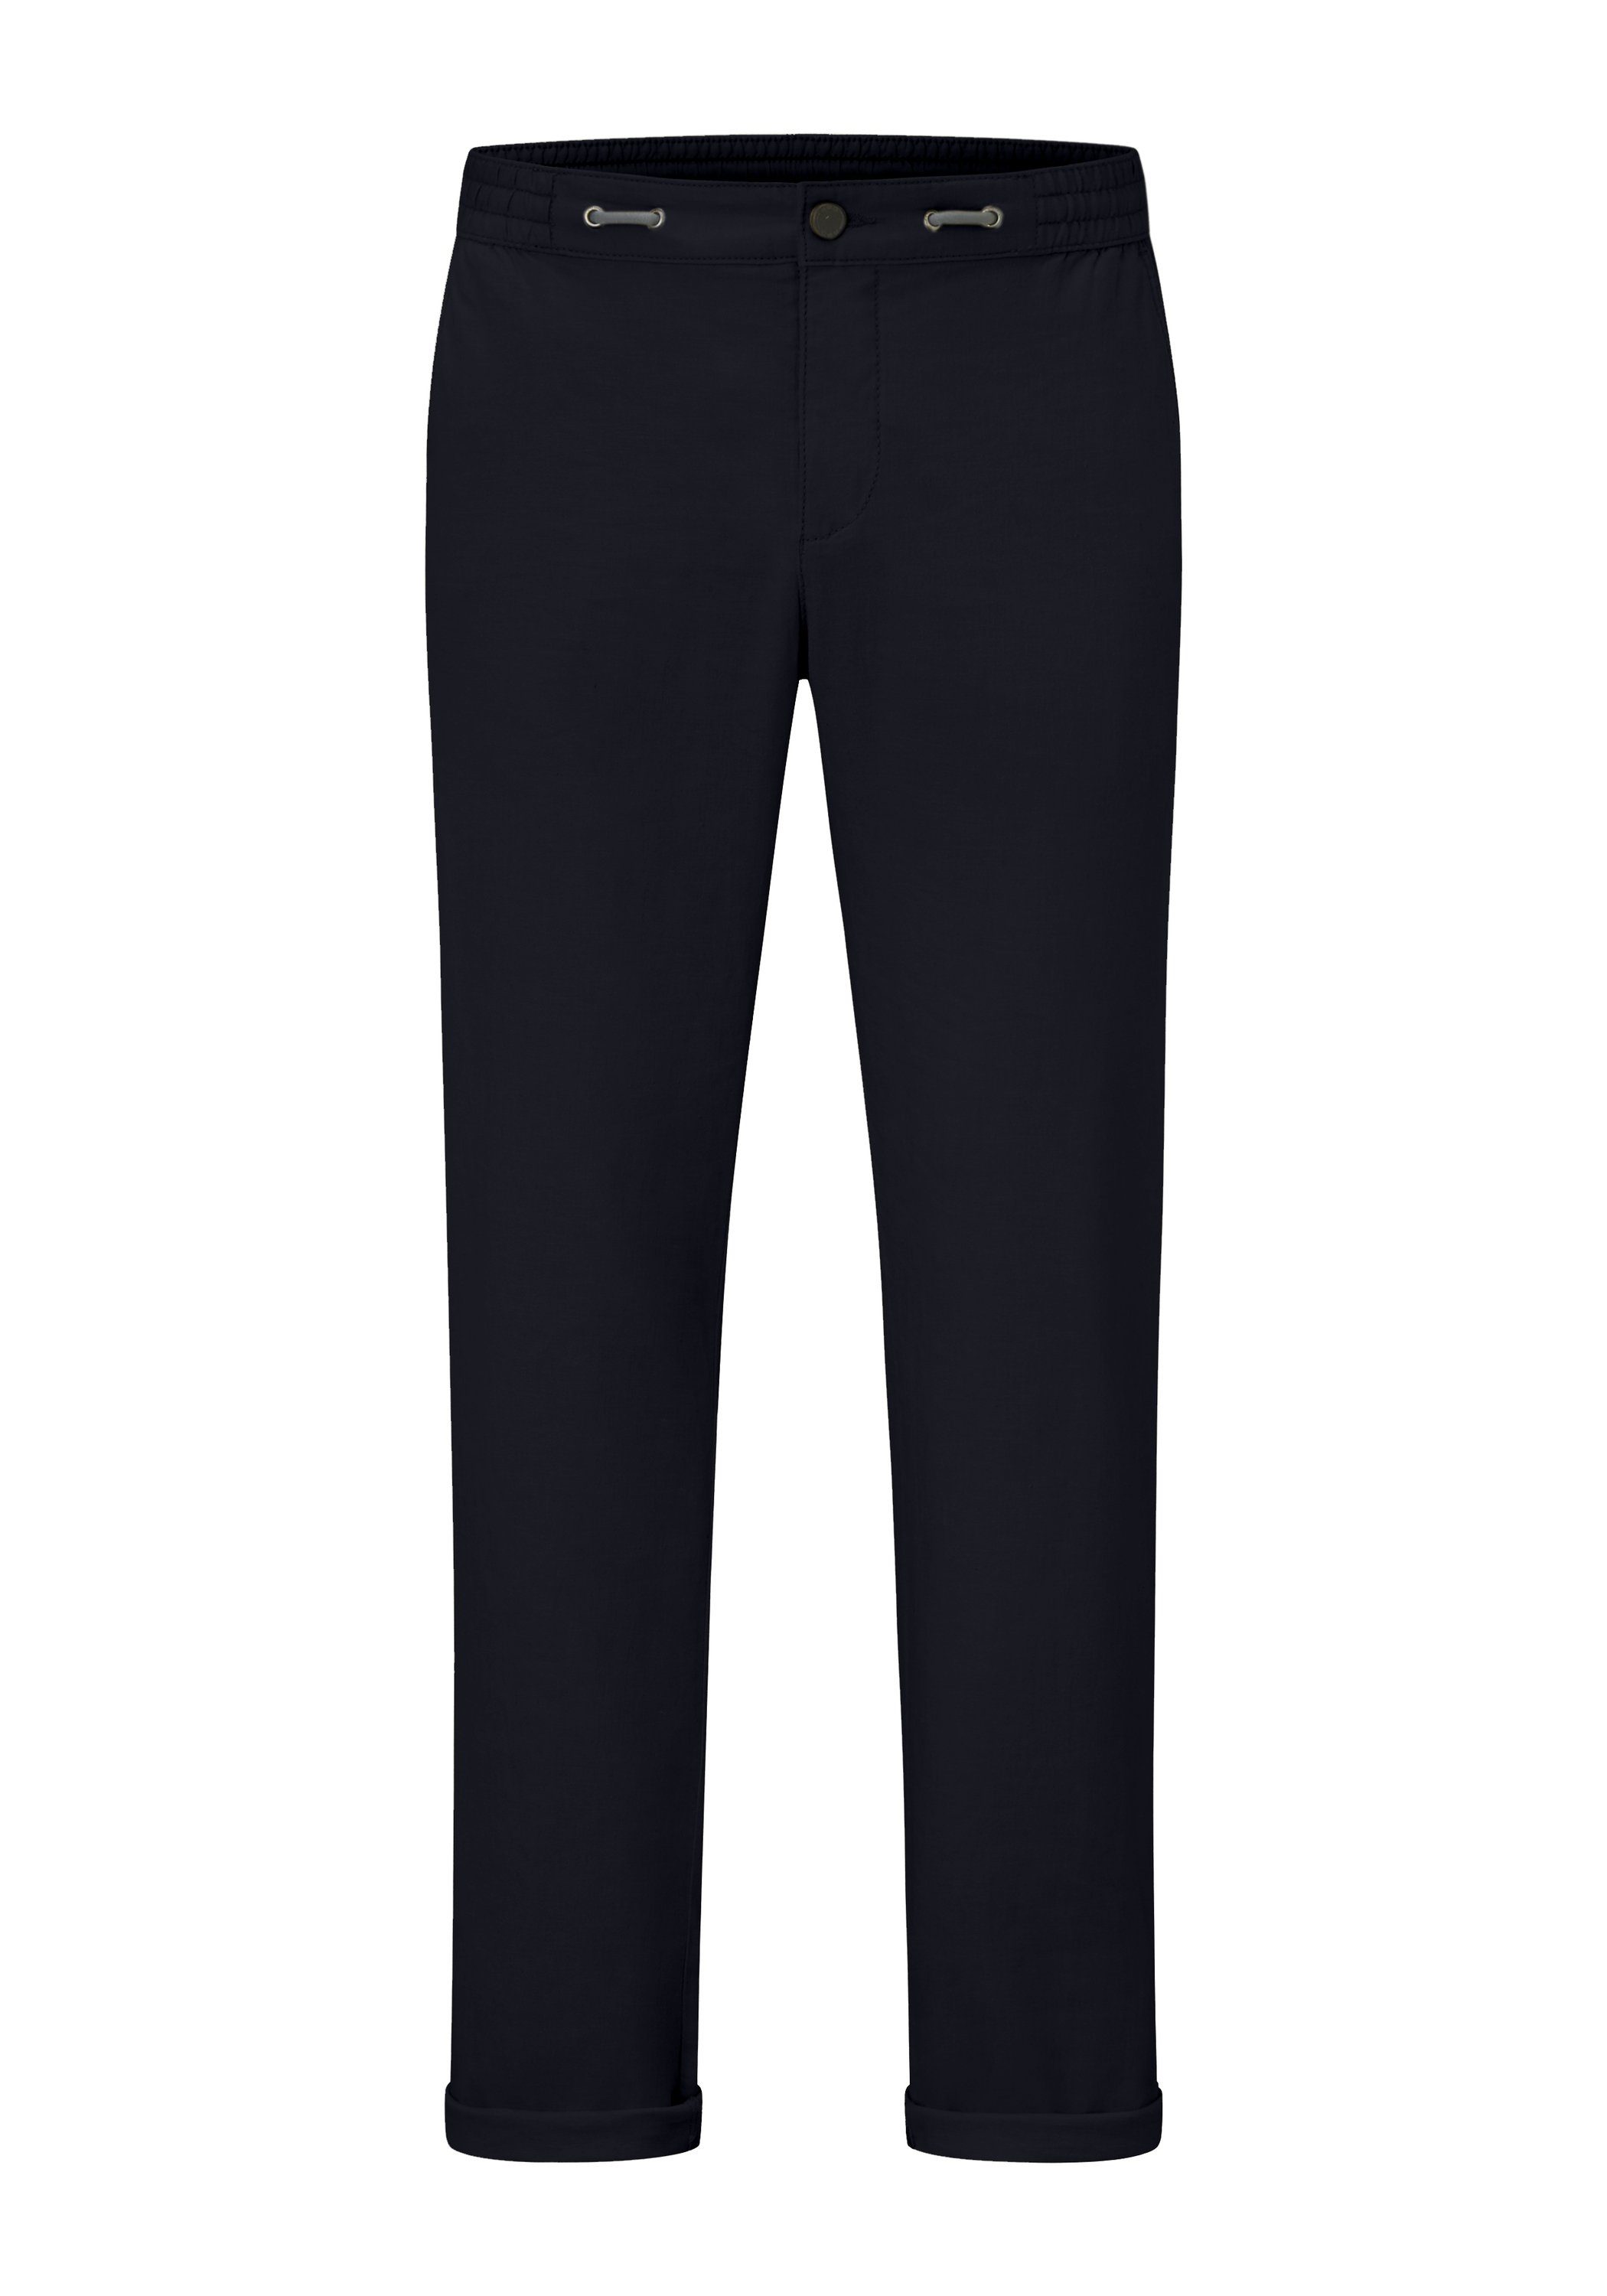 Redpoint Chinohose Carden navy Sehr leichte Stretch-Chinohose